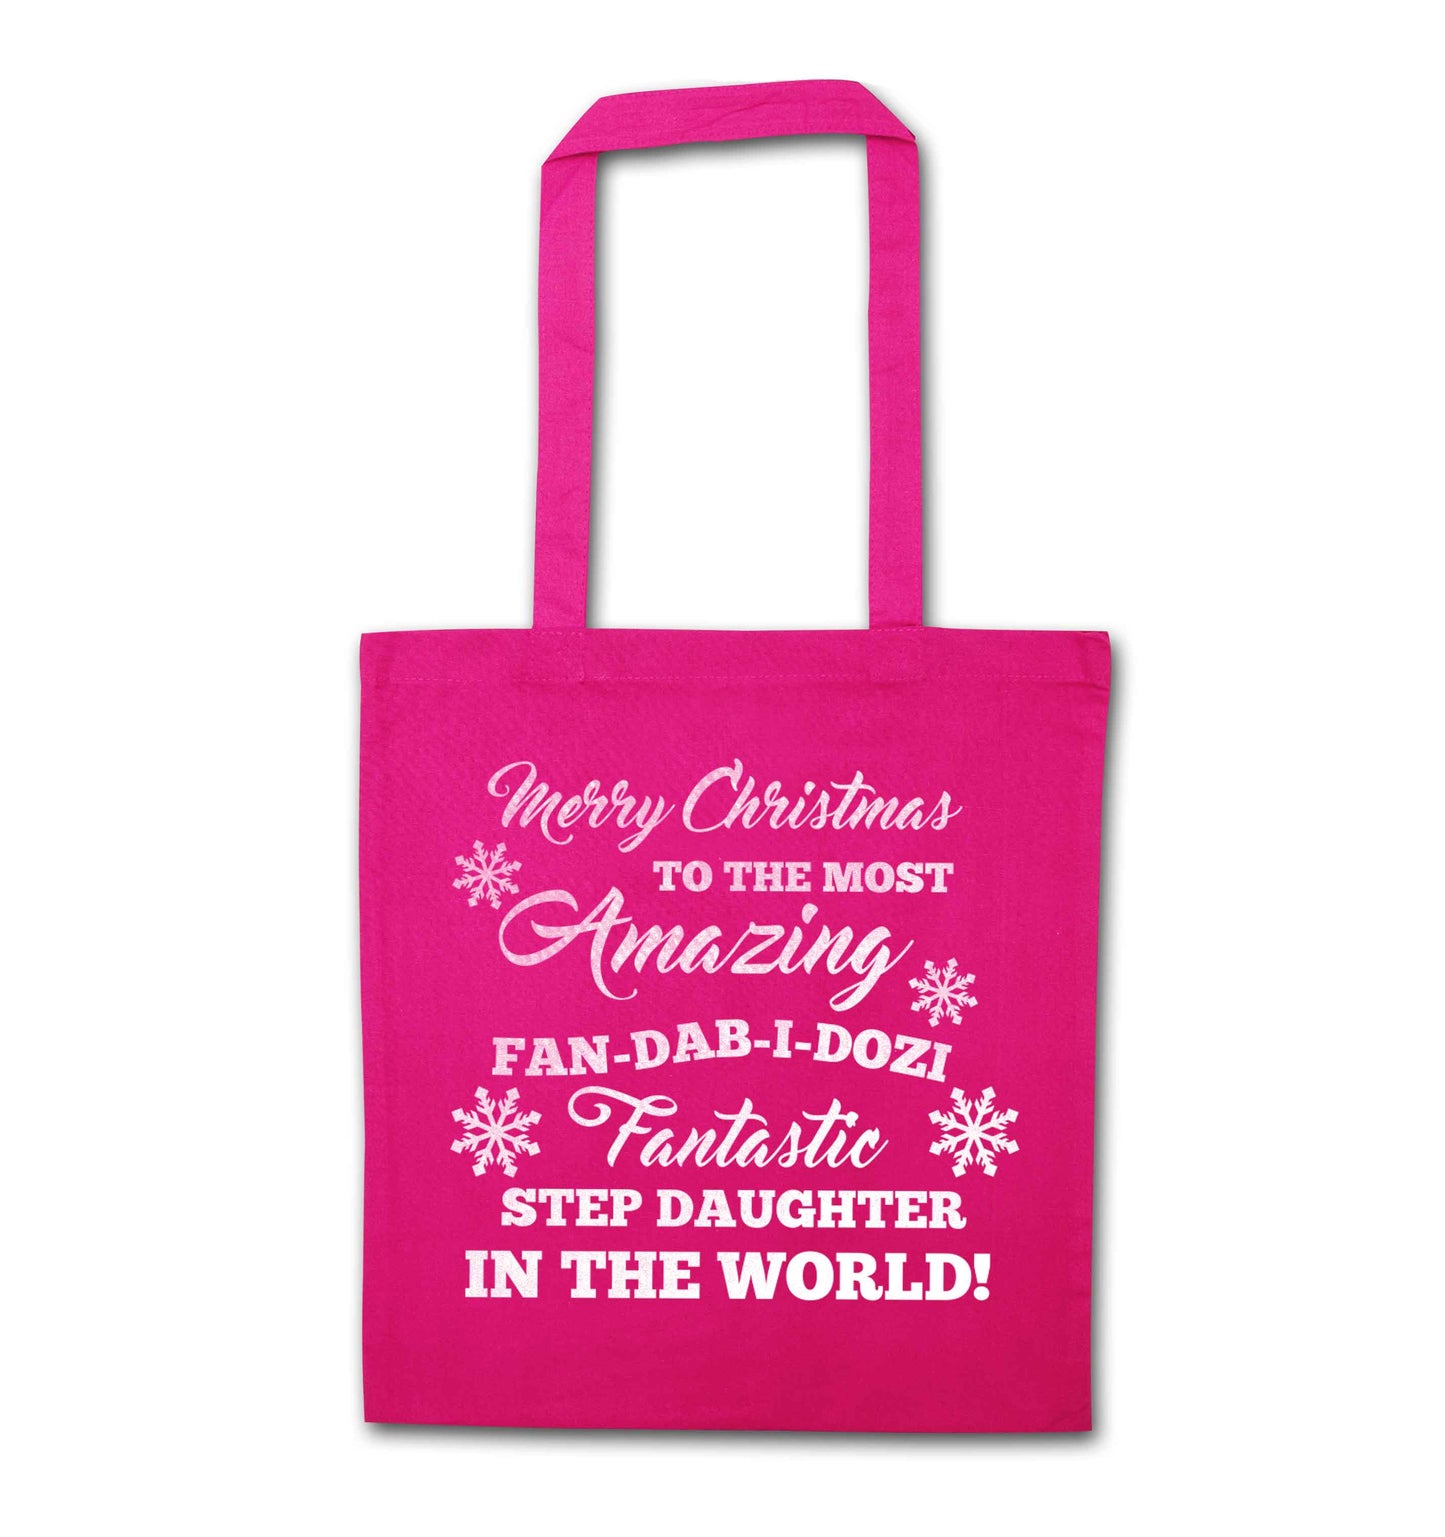 Merry Christmas to the most amazing fan-dab-i-dozi fantasic Step Daughter in the world pink tote bag